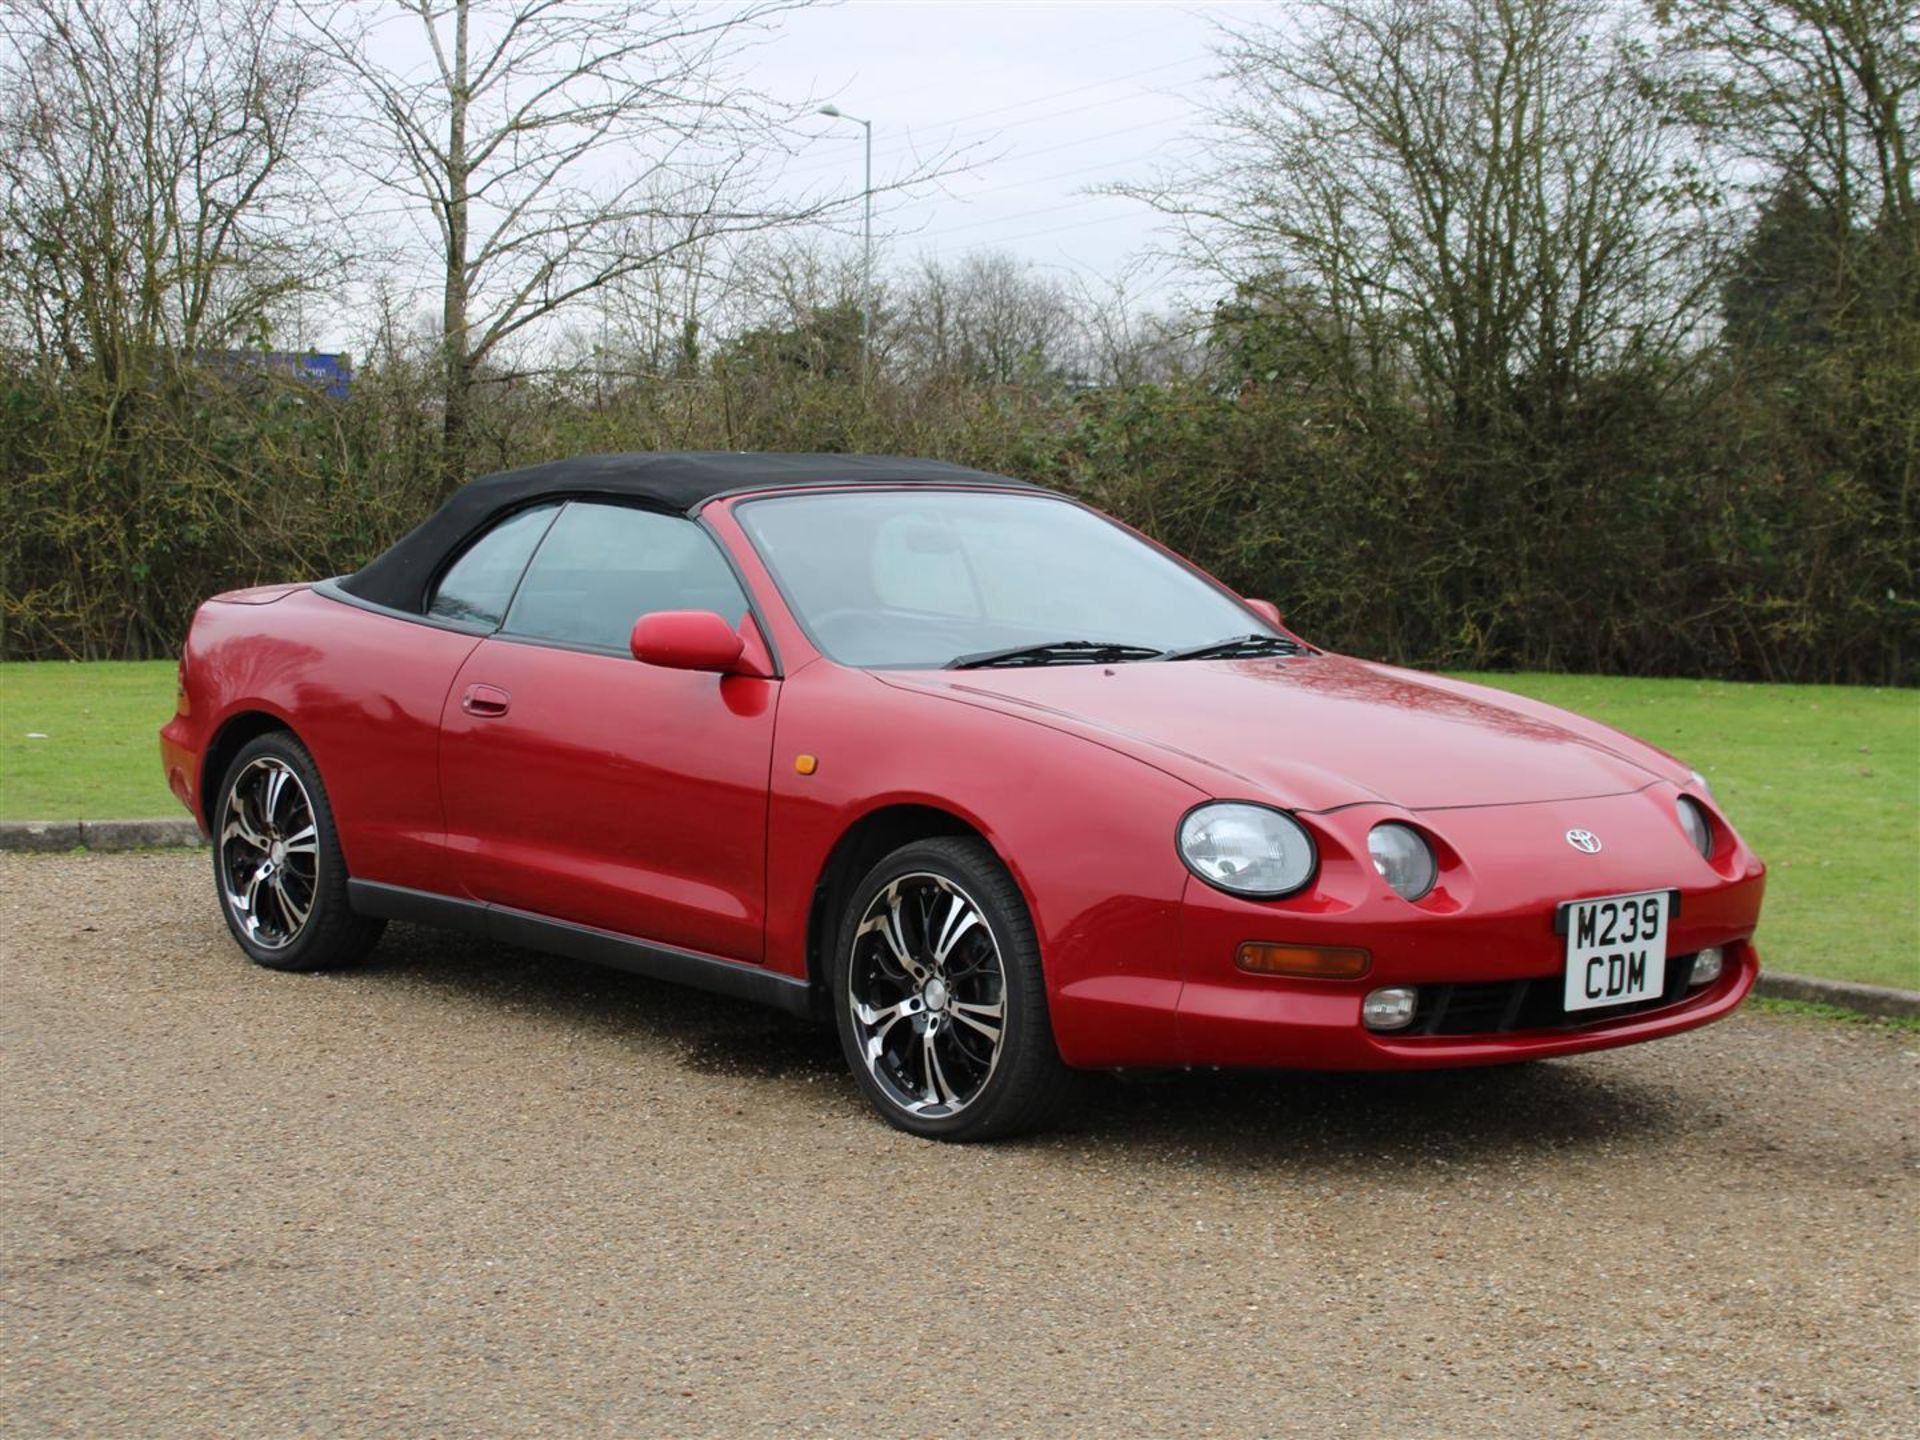 1995 Toyota Celica ST202 Convertible - Image 2 of 20